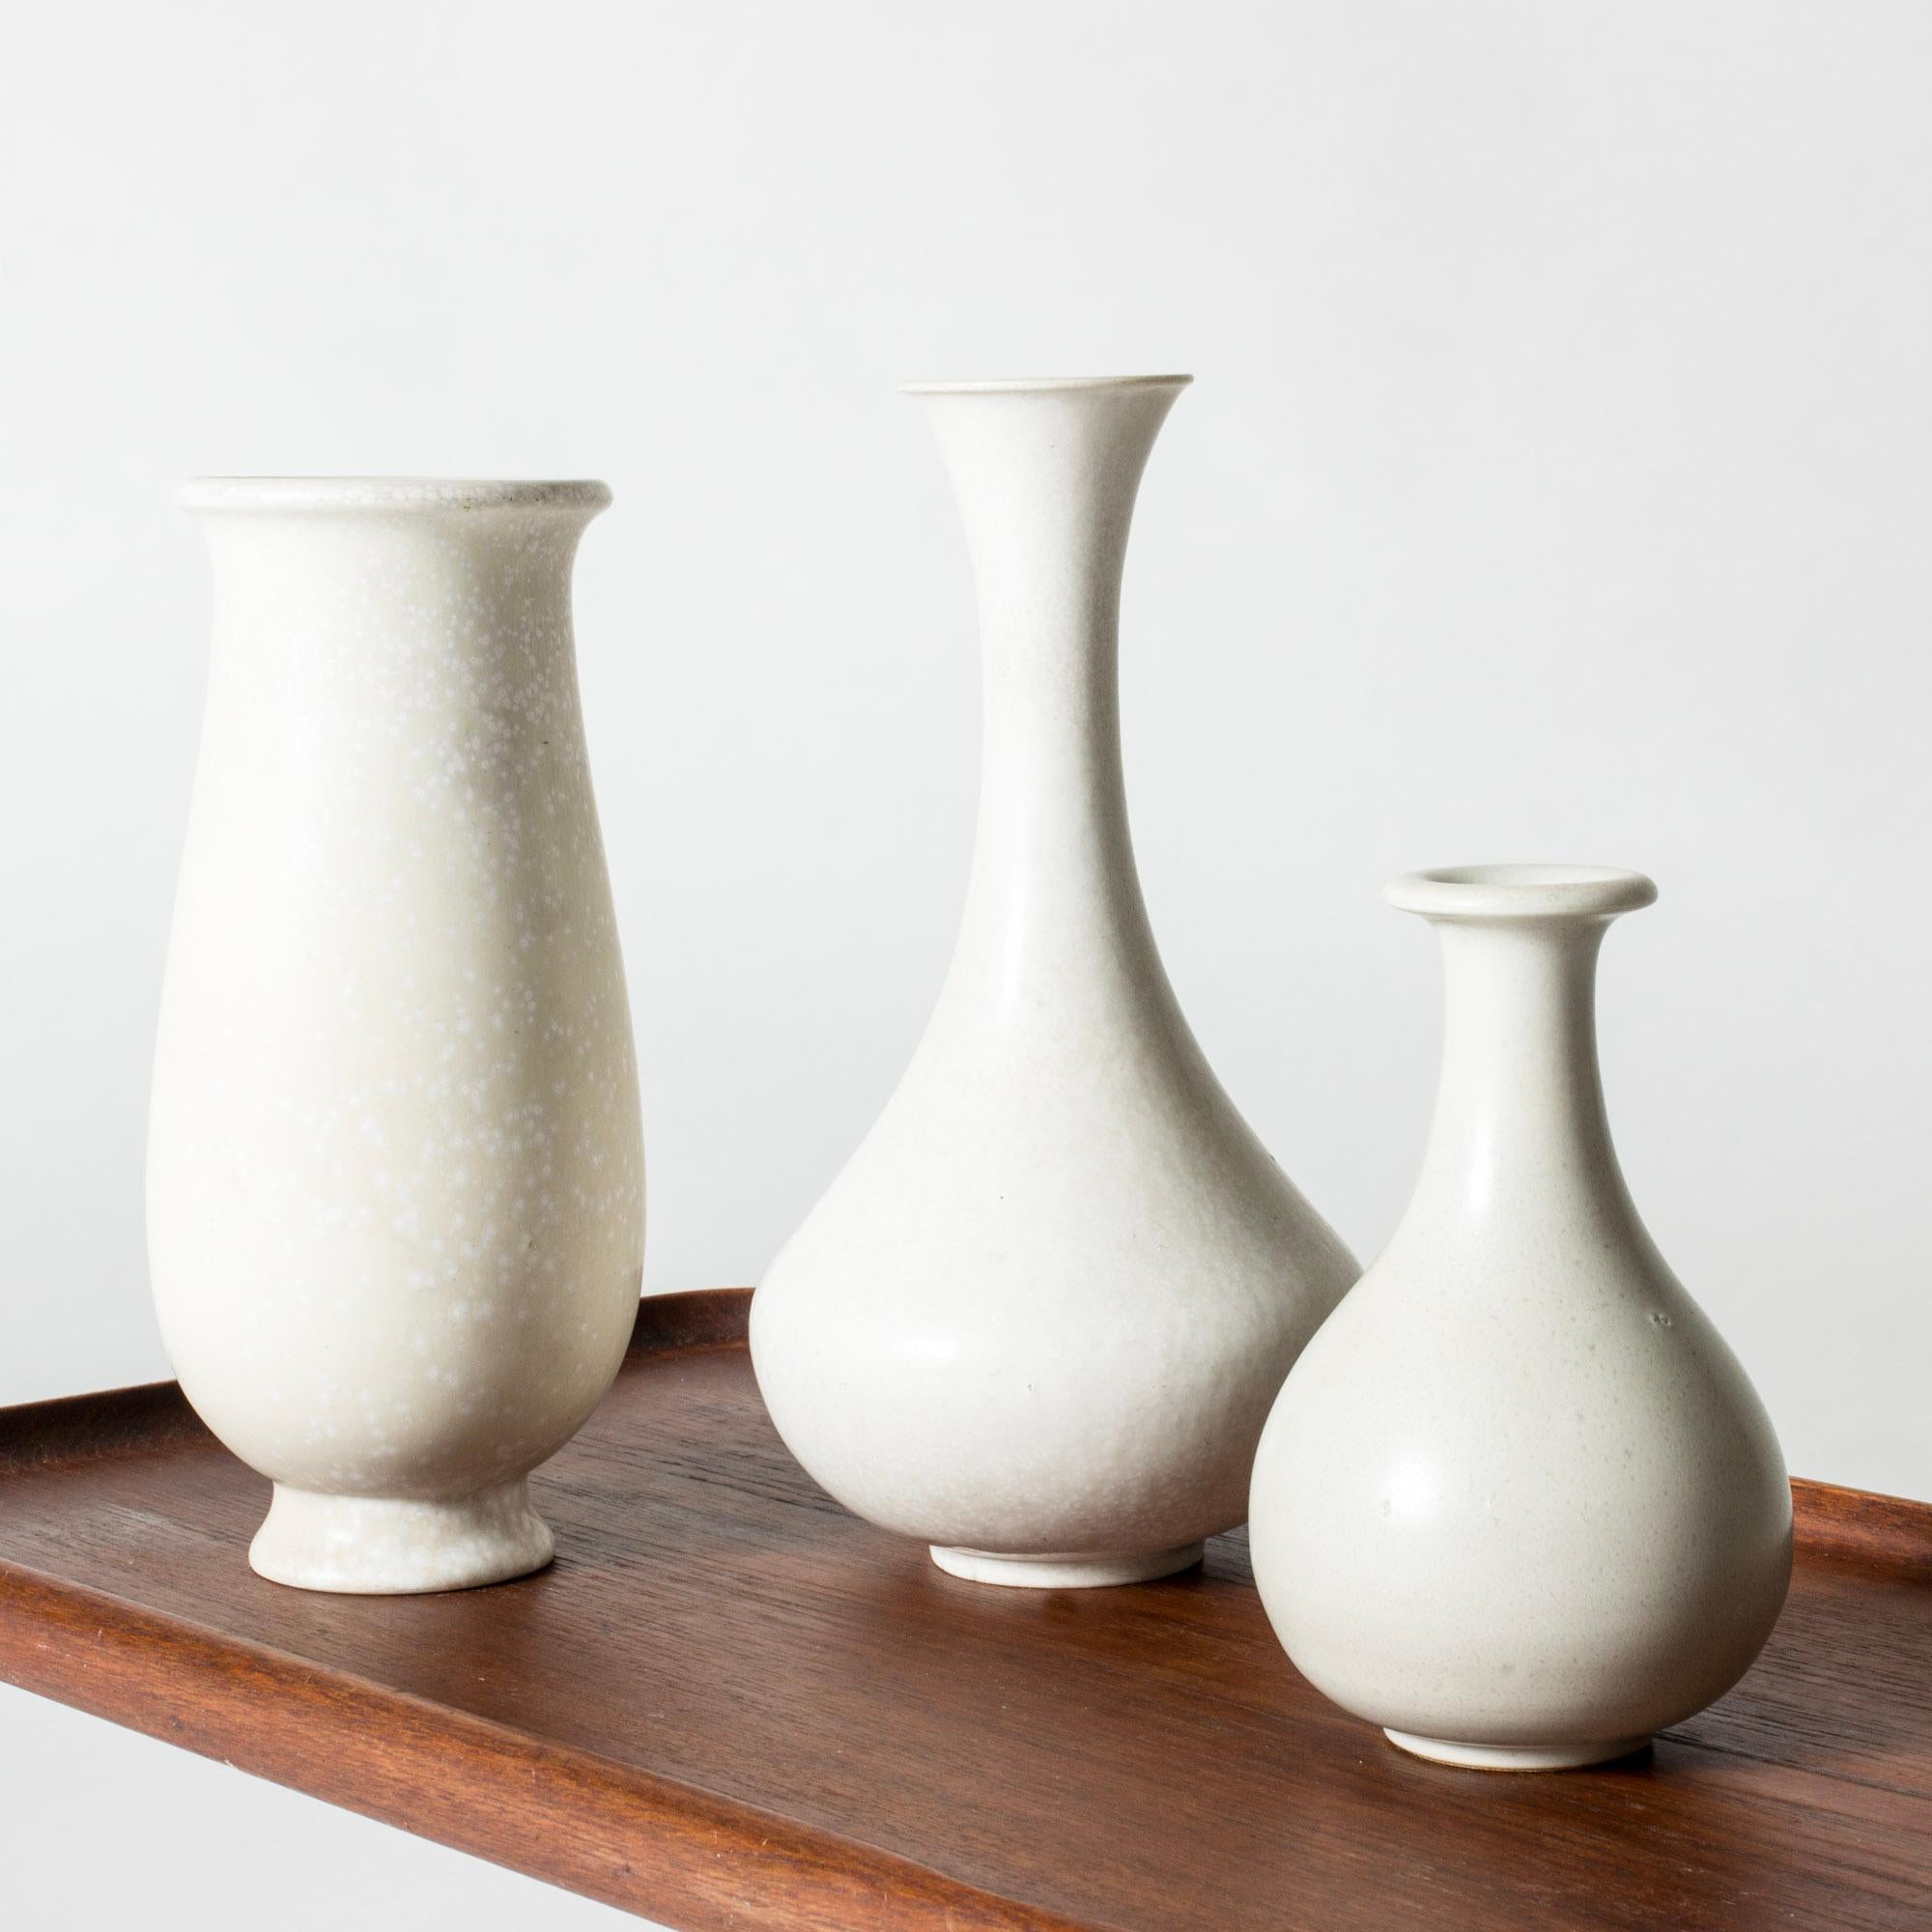 Mid-20th Century Five Modernist Stoneware Vases by Gunnar Nylund for Rörstrand, Sweden, 1940s For Sale